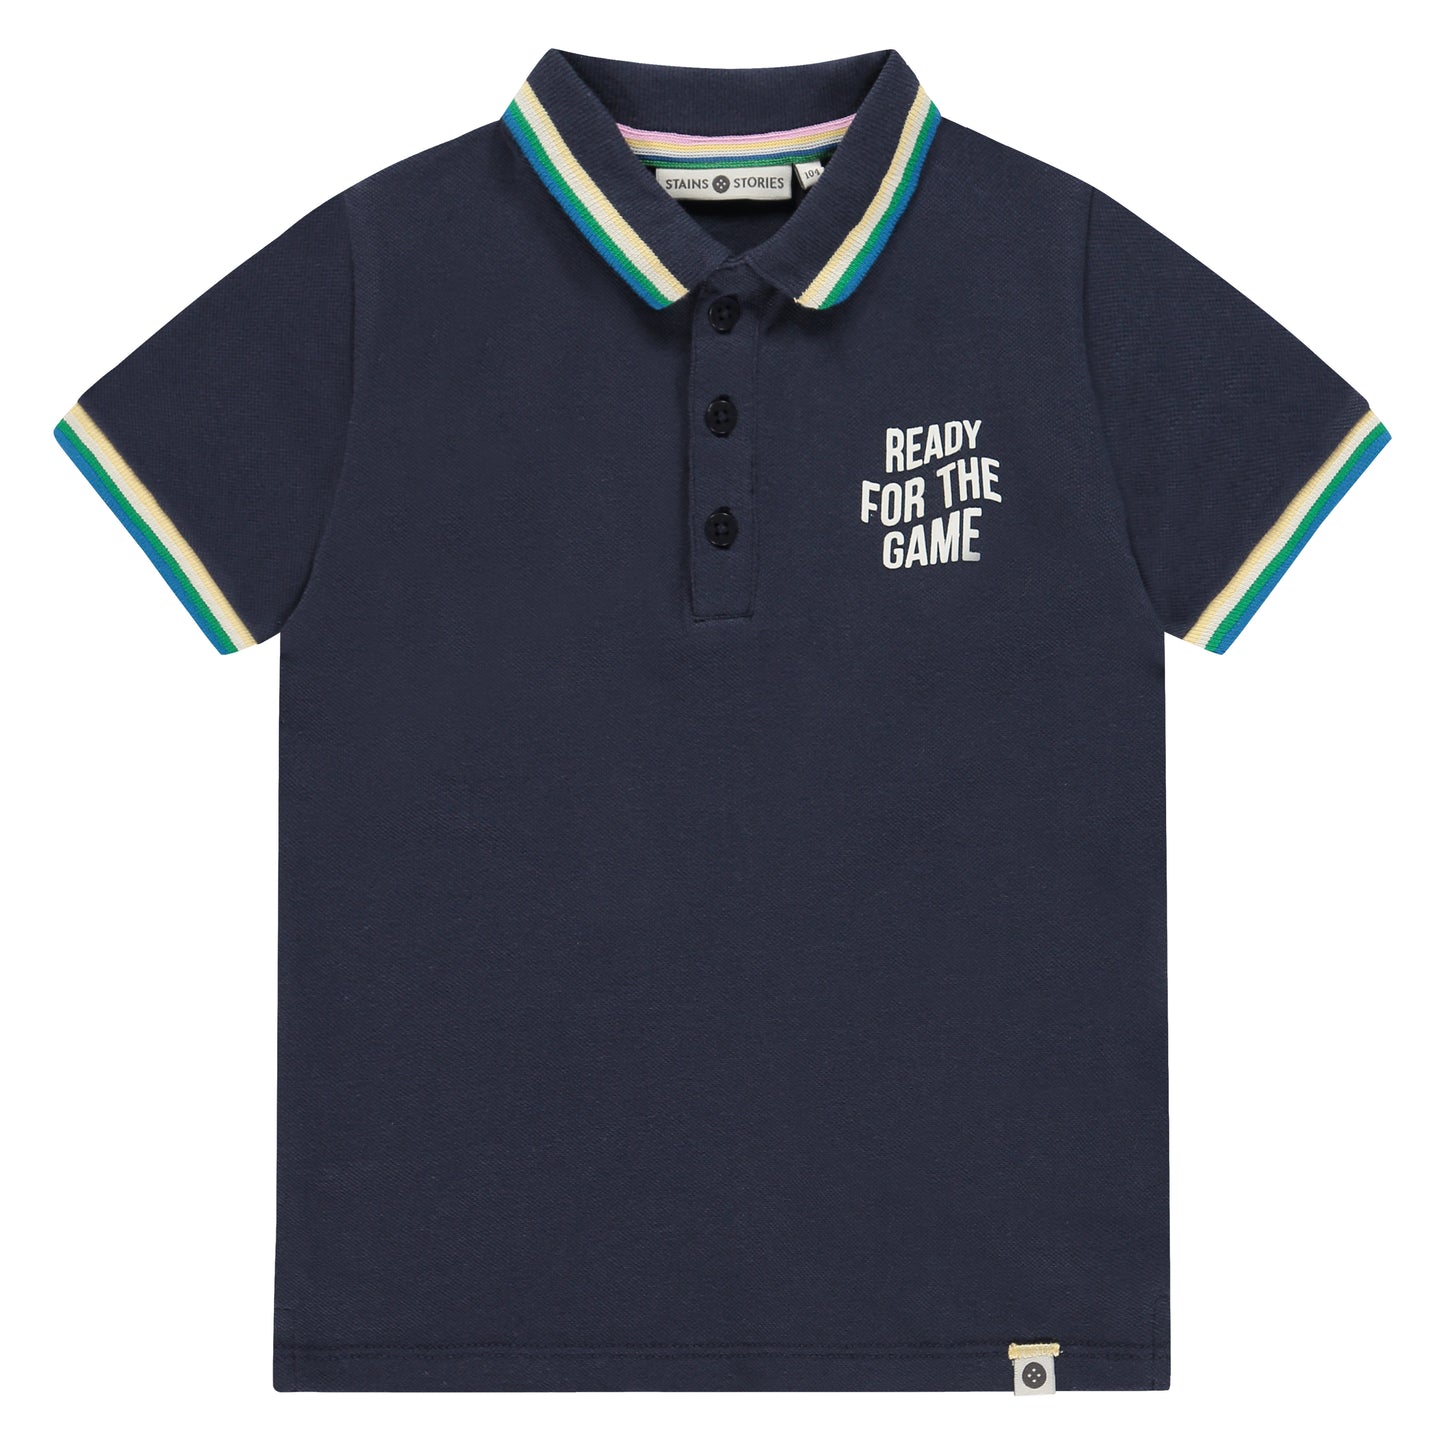 Stains & Stories Polo - Dark royal